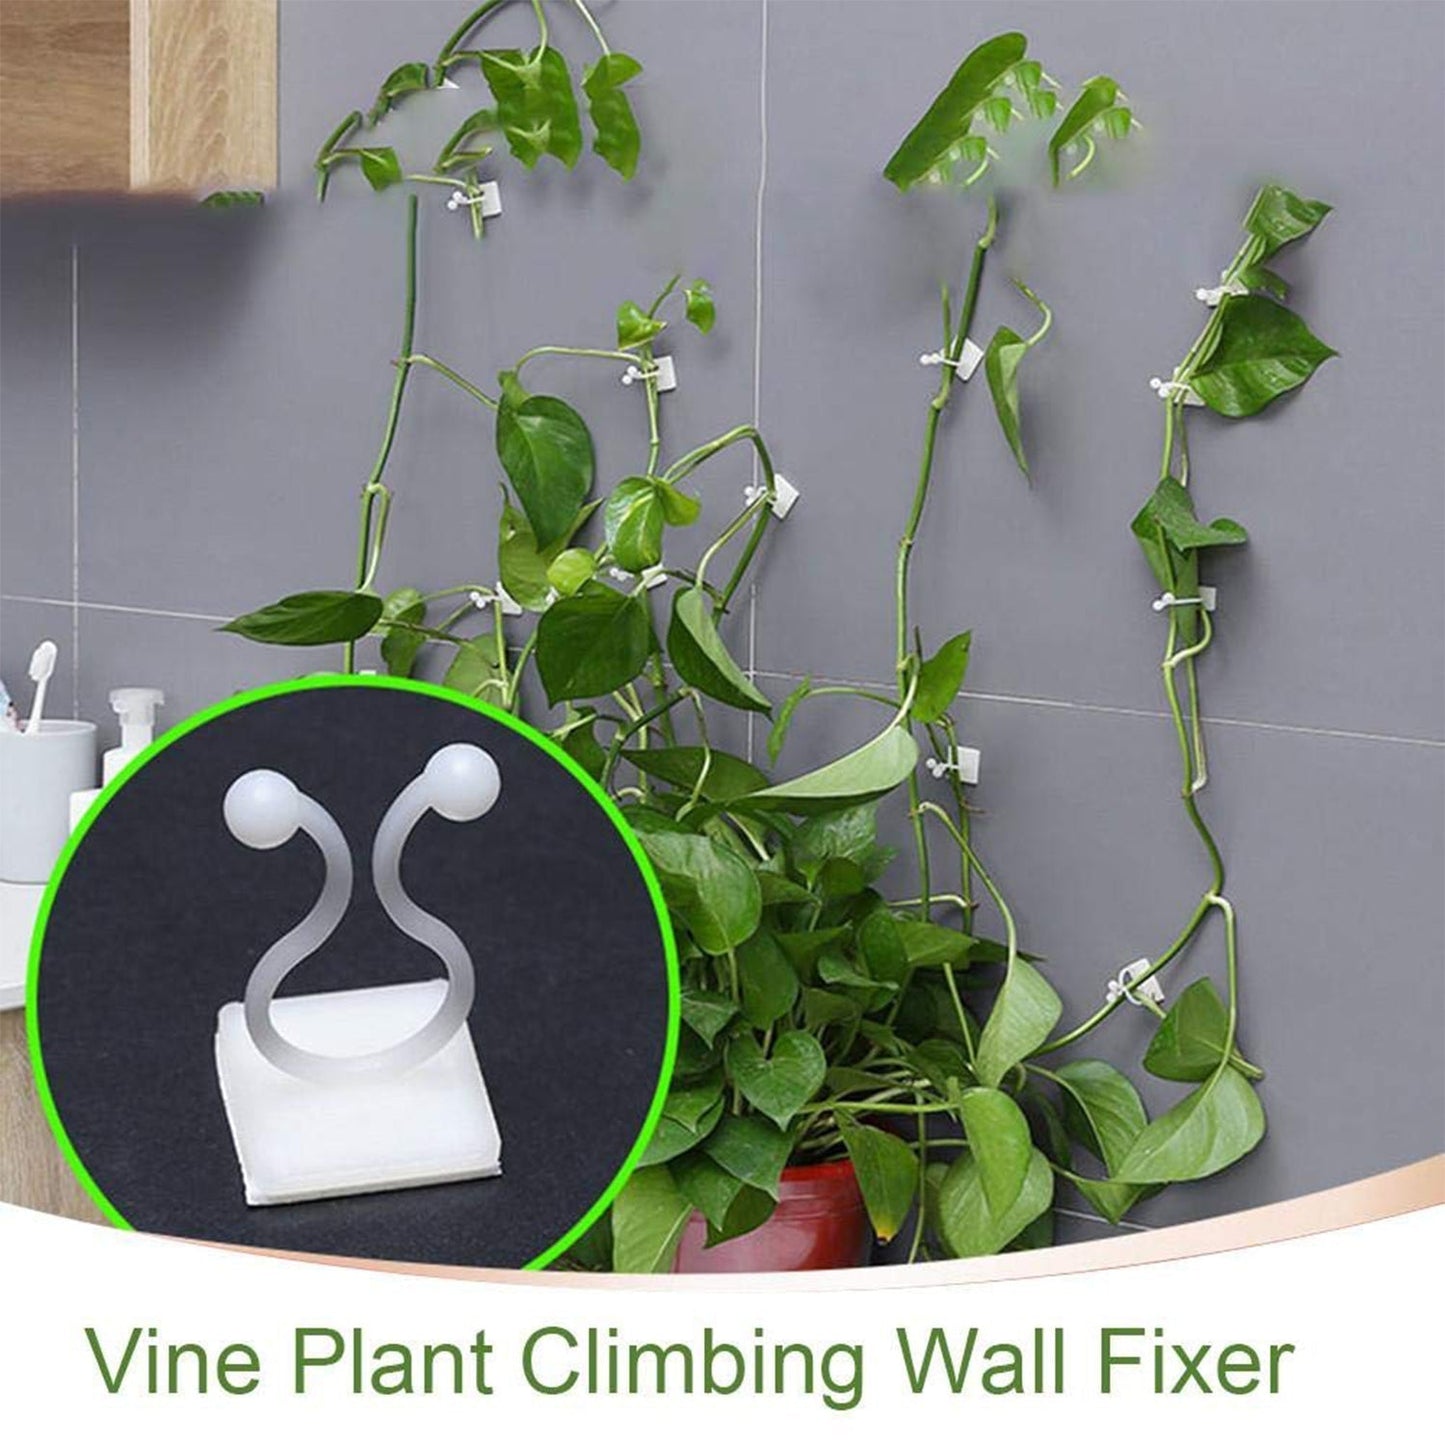 6156 wall Plant Climbing Clip widely used for holding plants and poultry purposes and all.